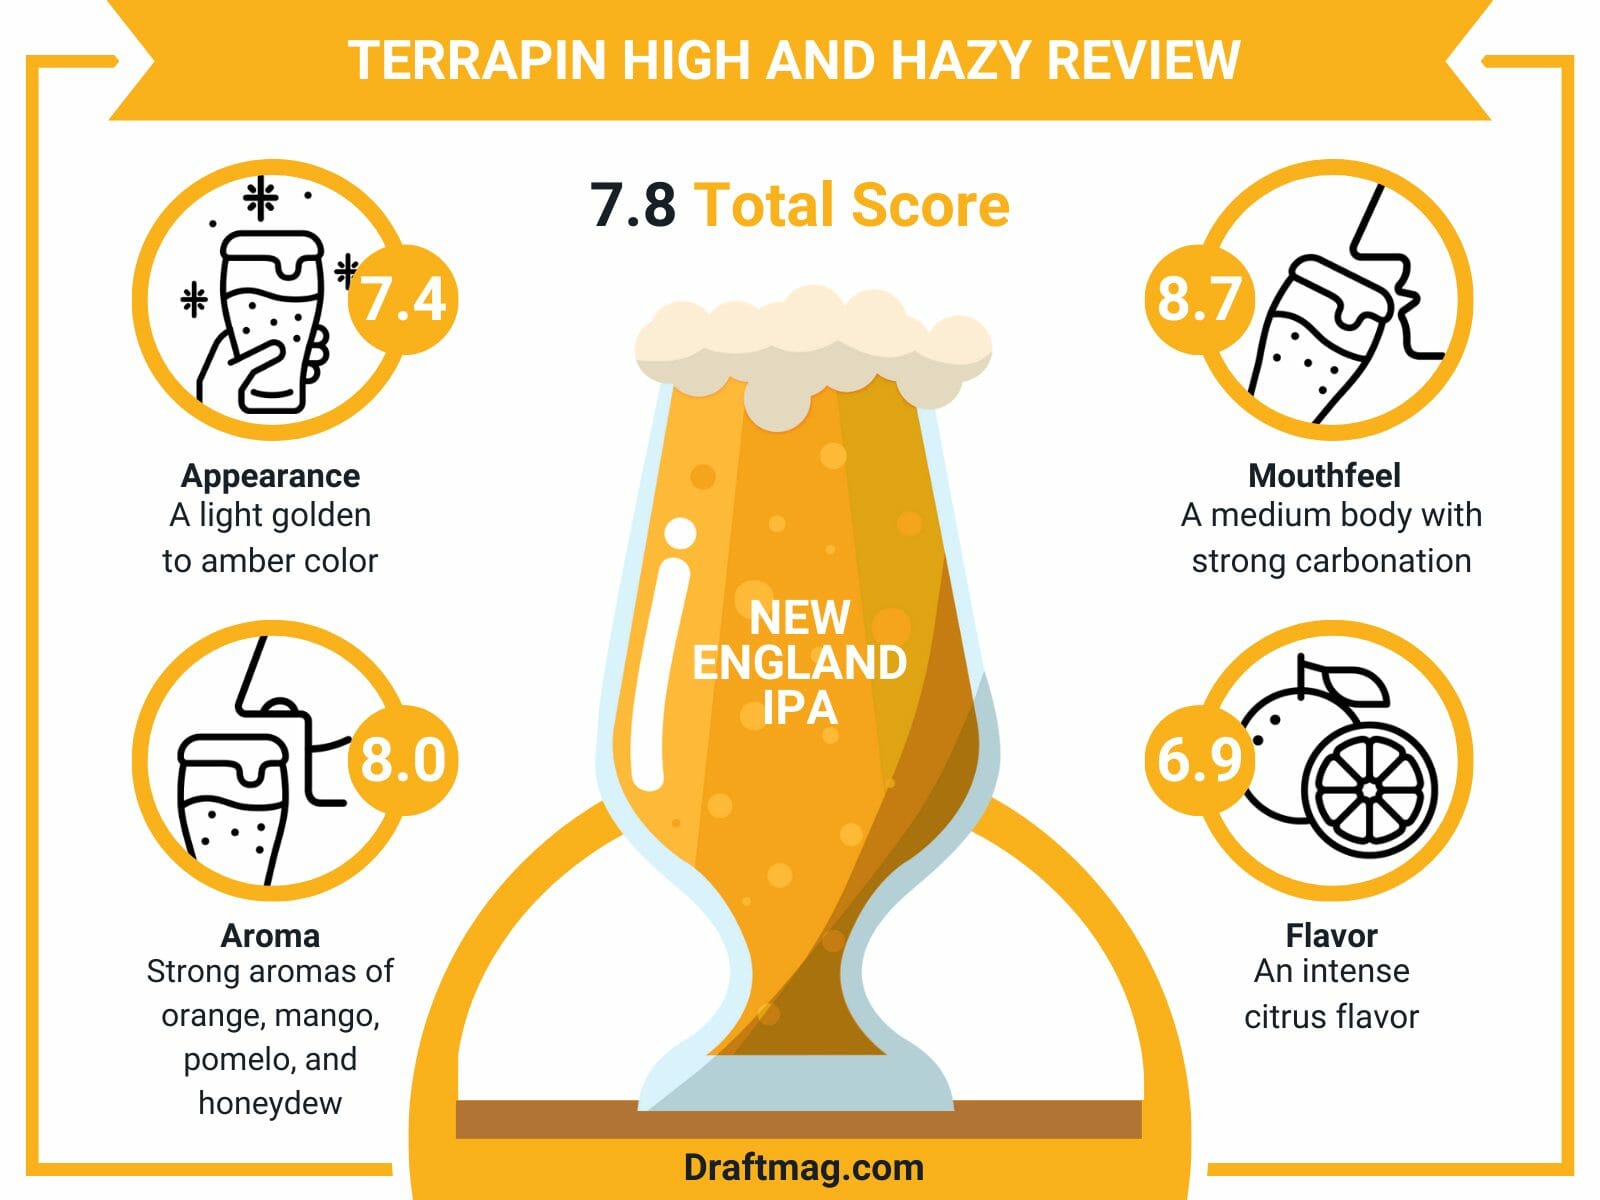 Terrapin High Review Infographic